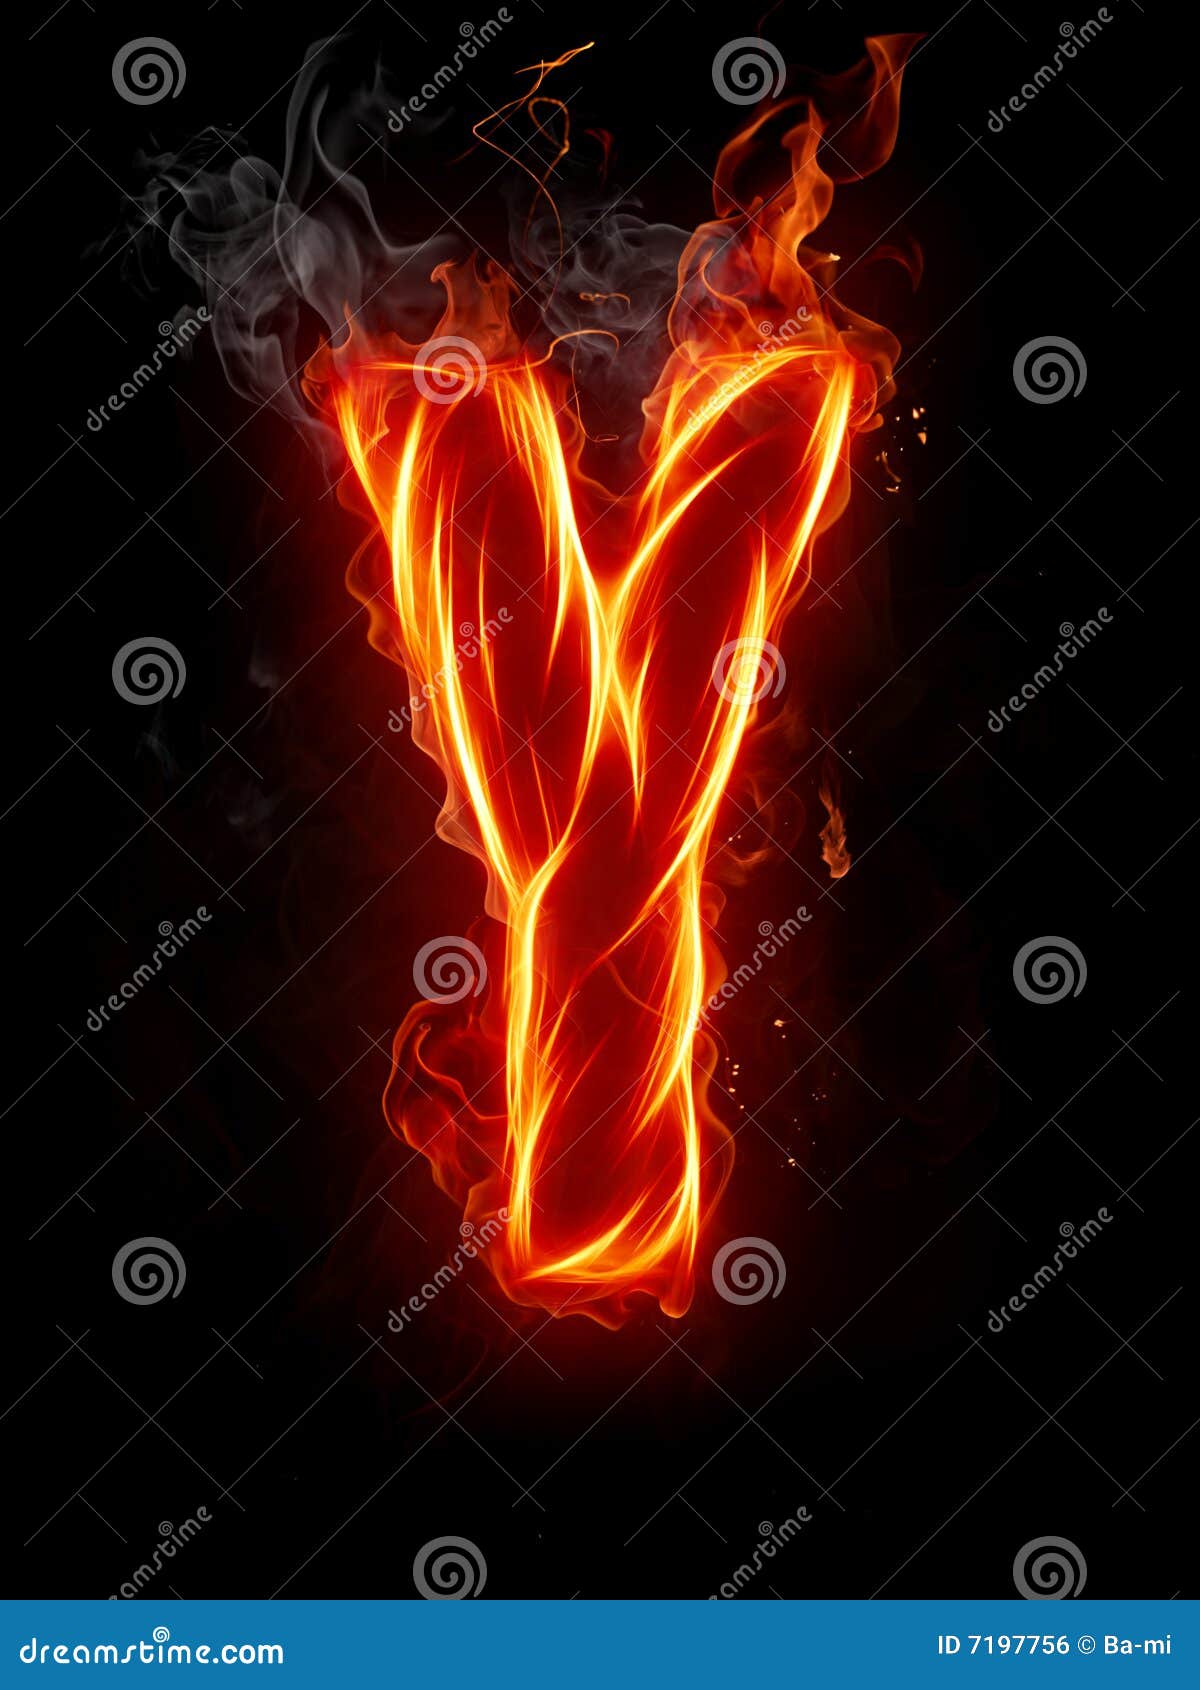 Premium PSD  Red symbol with notches letter y